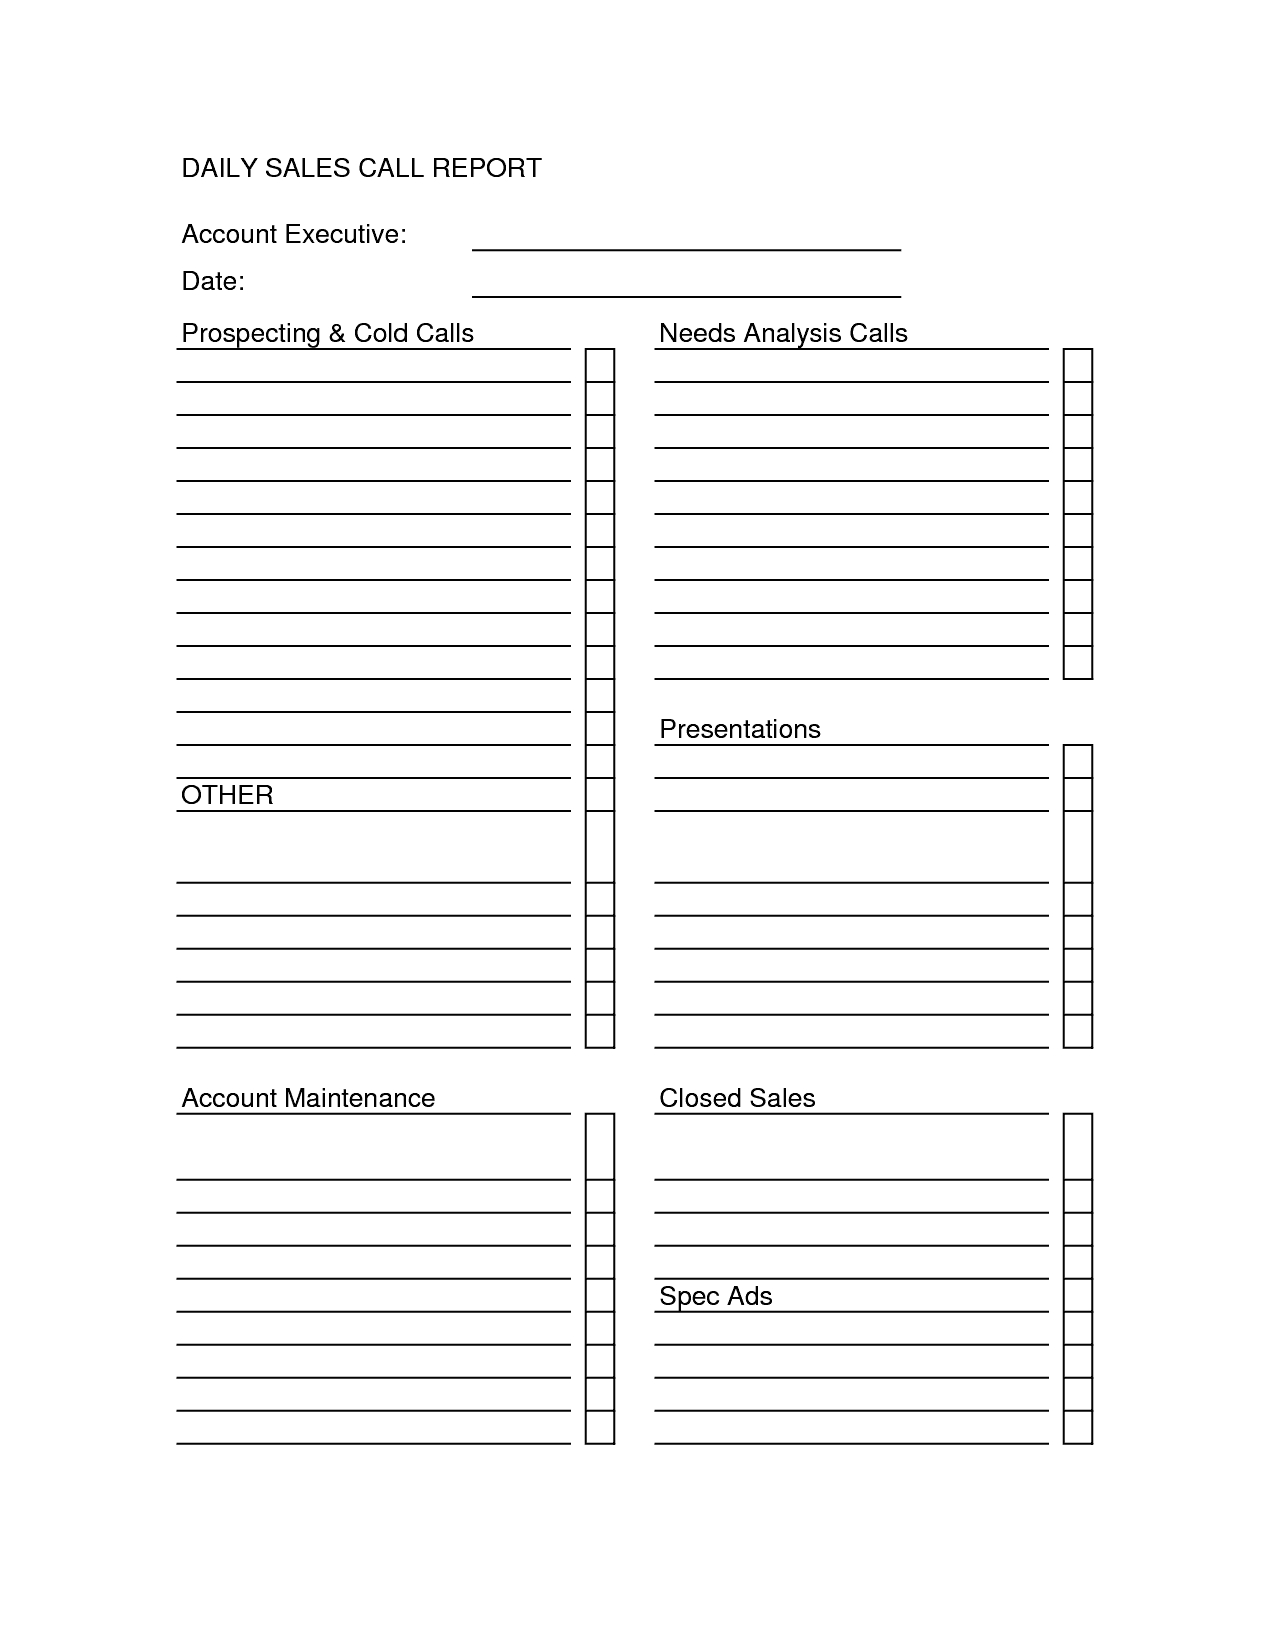 Sales Call Report Templates - Word Excel Fomats Pertaining To Sales Call Report Template Free